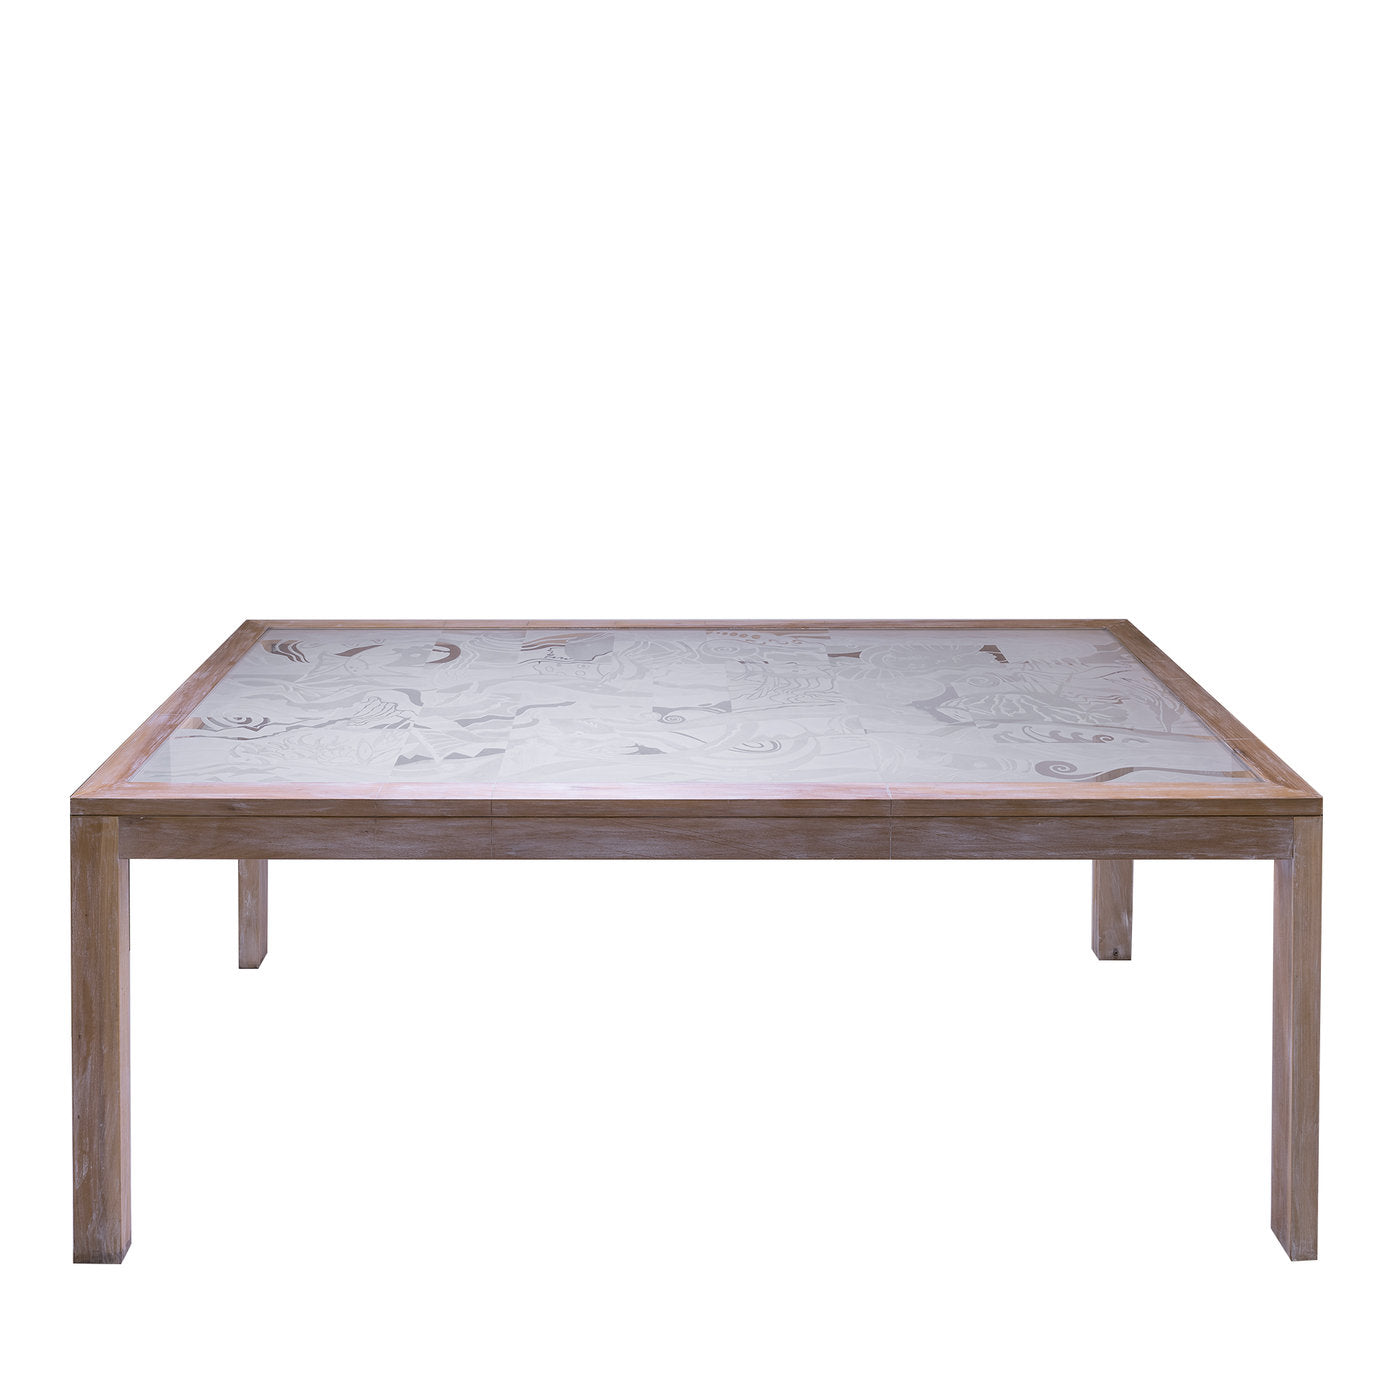 Sea Wood Dining Table - Alternative view 1